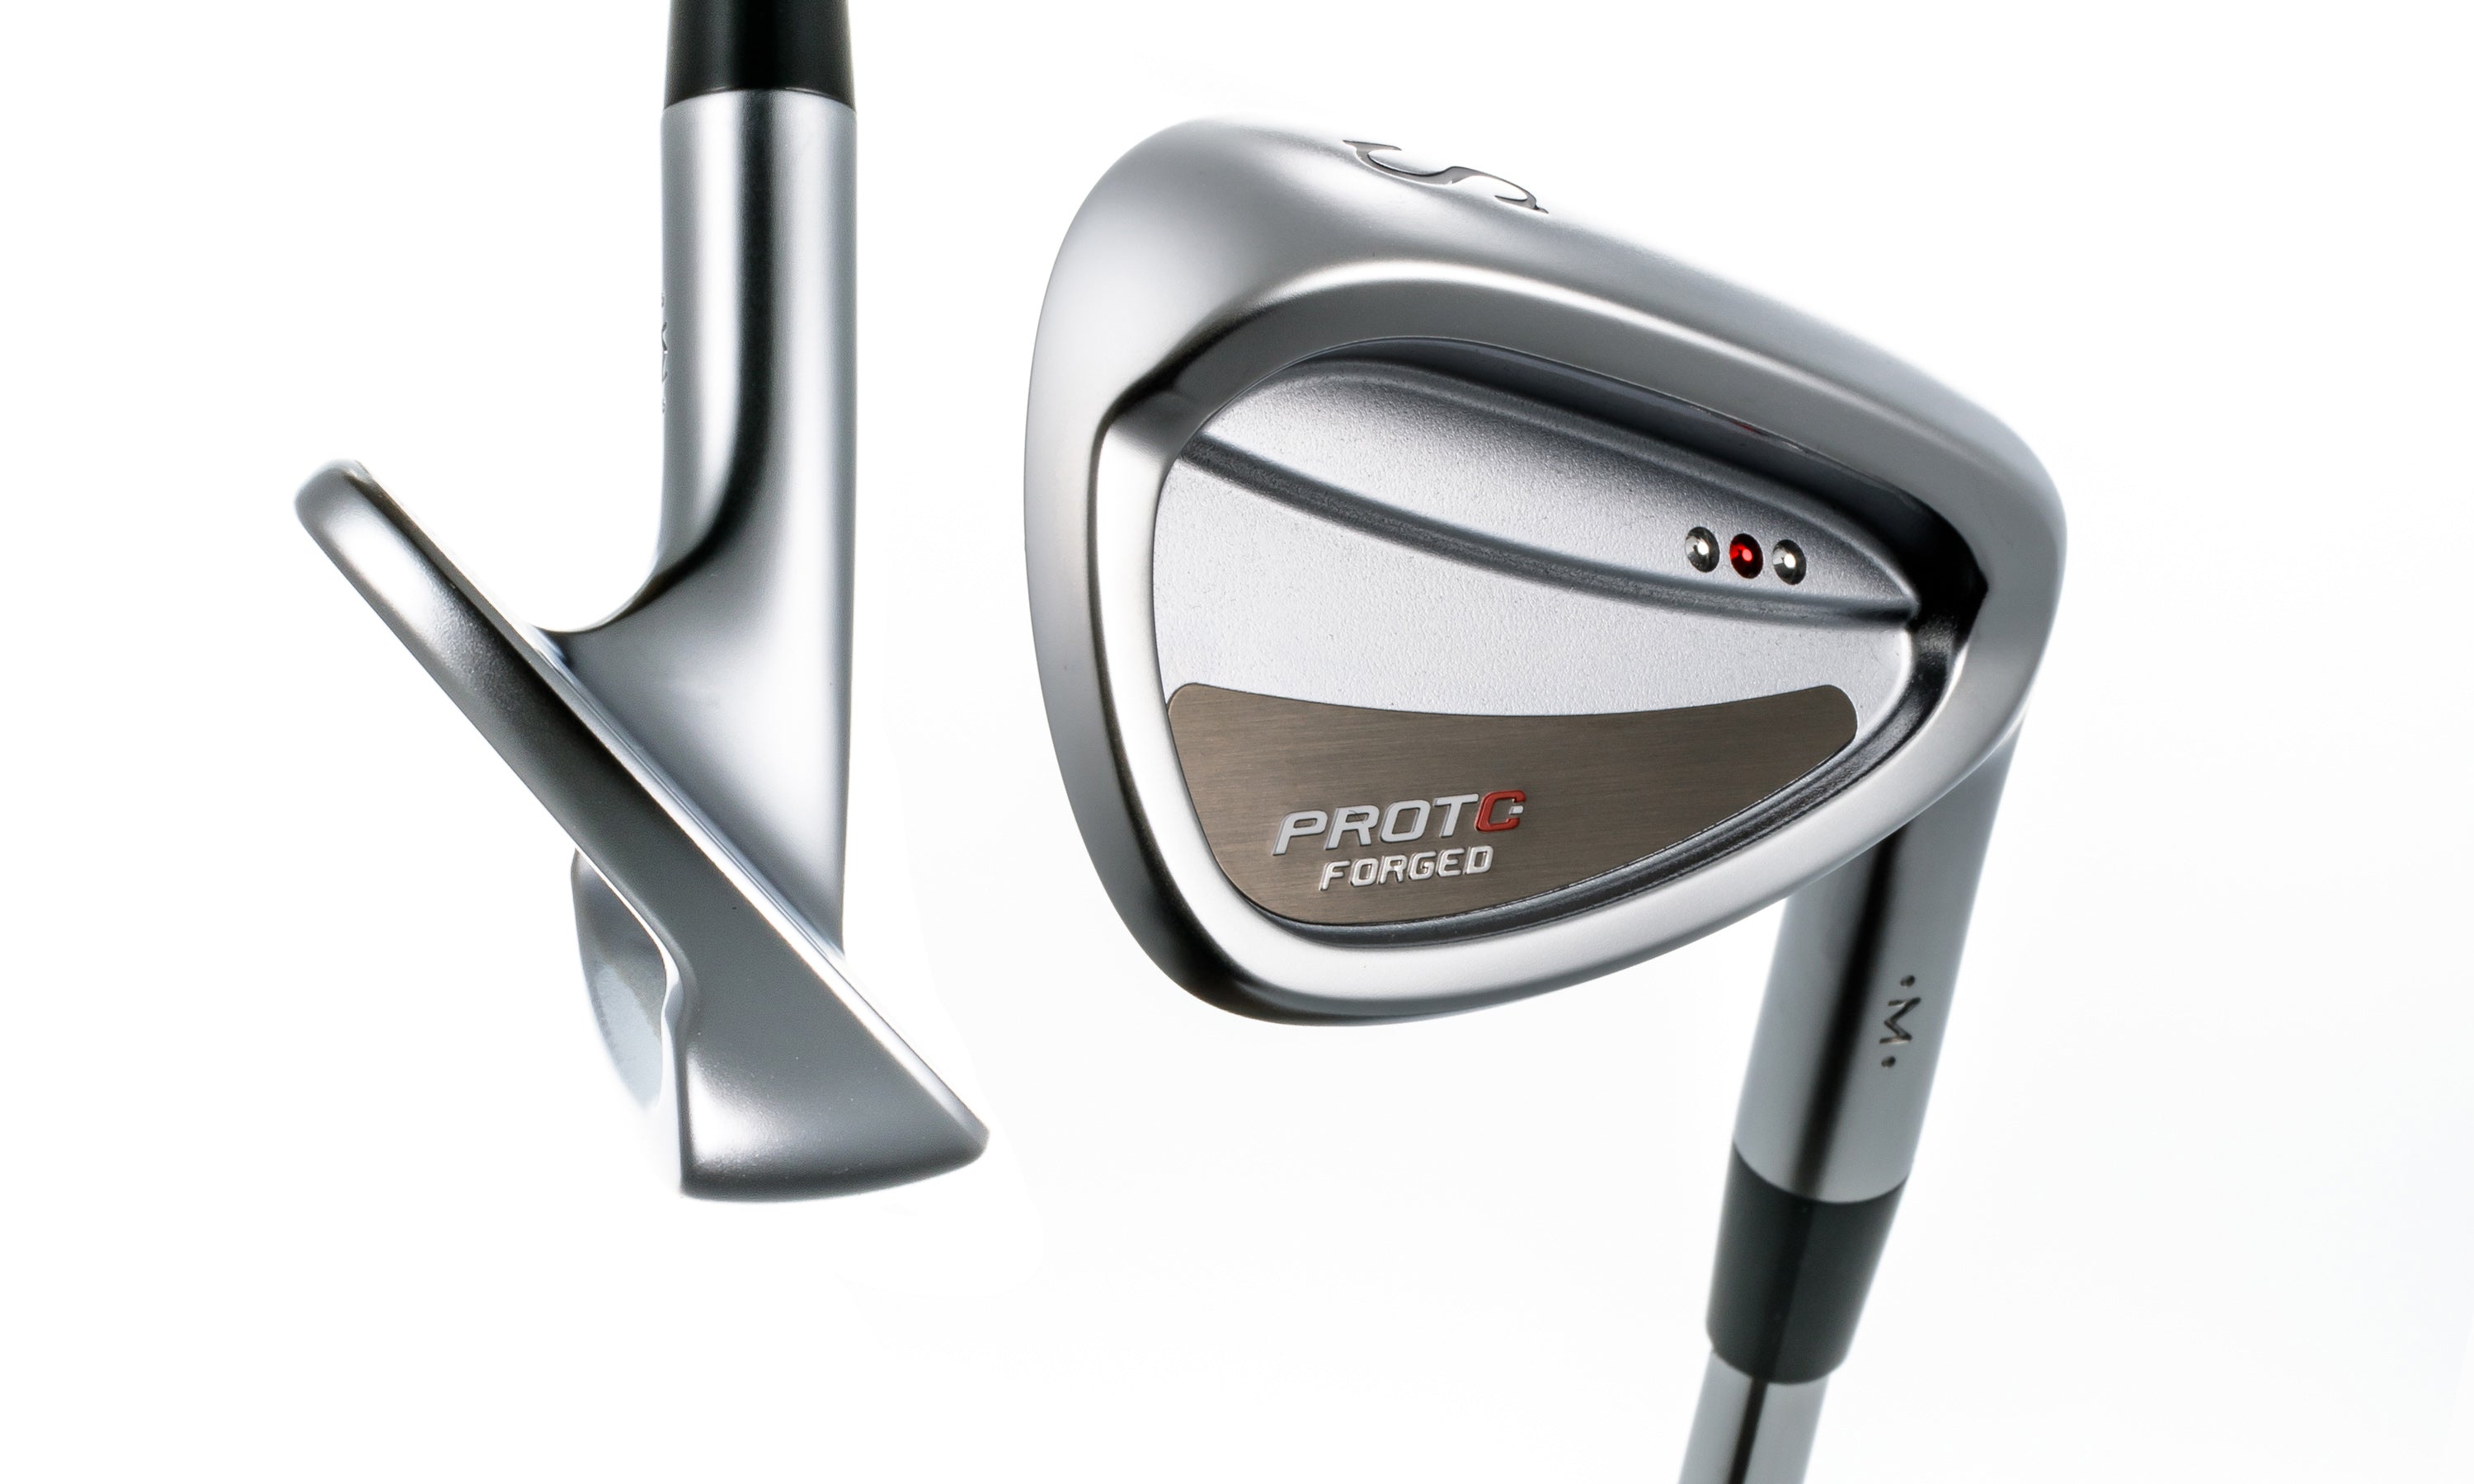 PROTOCONCEPT Golf, Protoconcept Wedge, Golf Wedge, Forged wedge, Wedge Technology